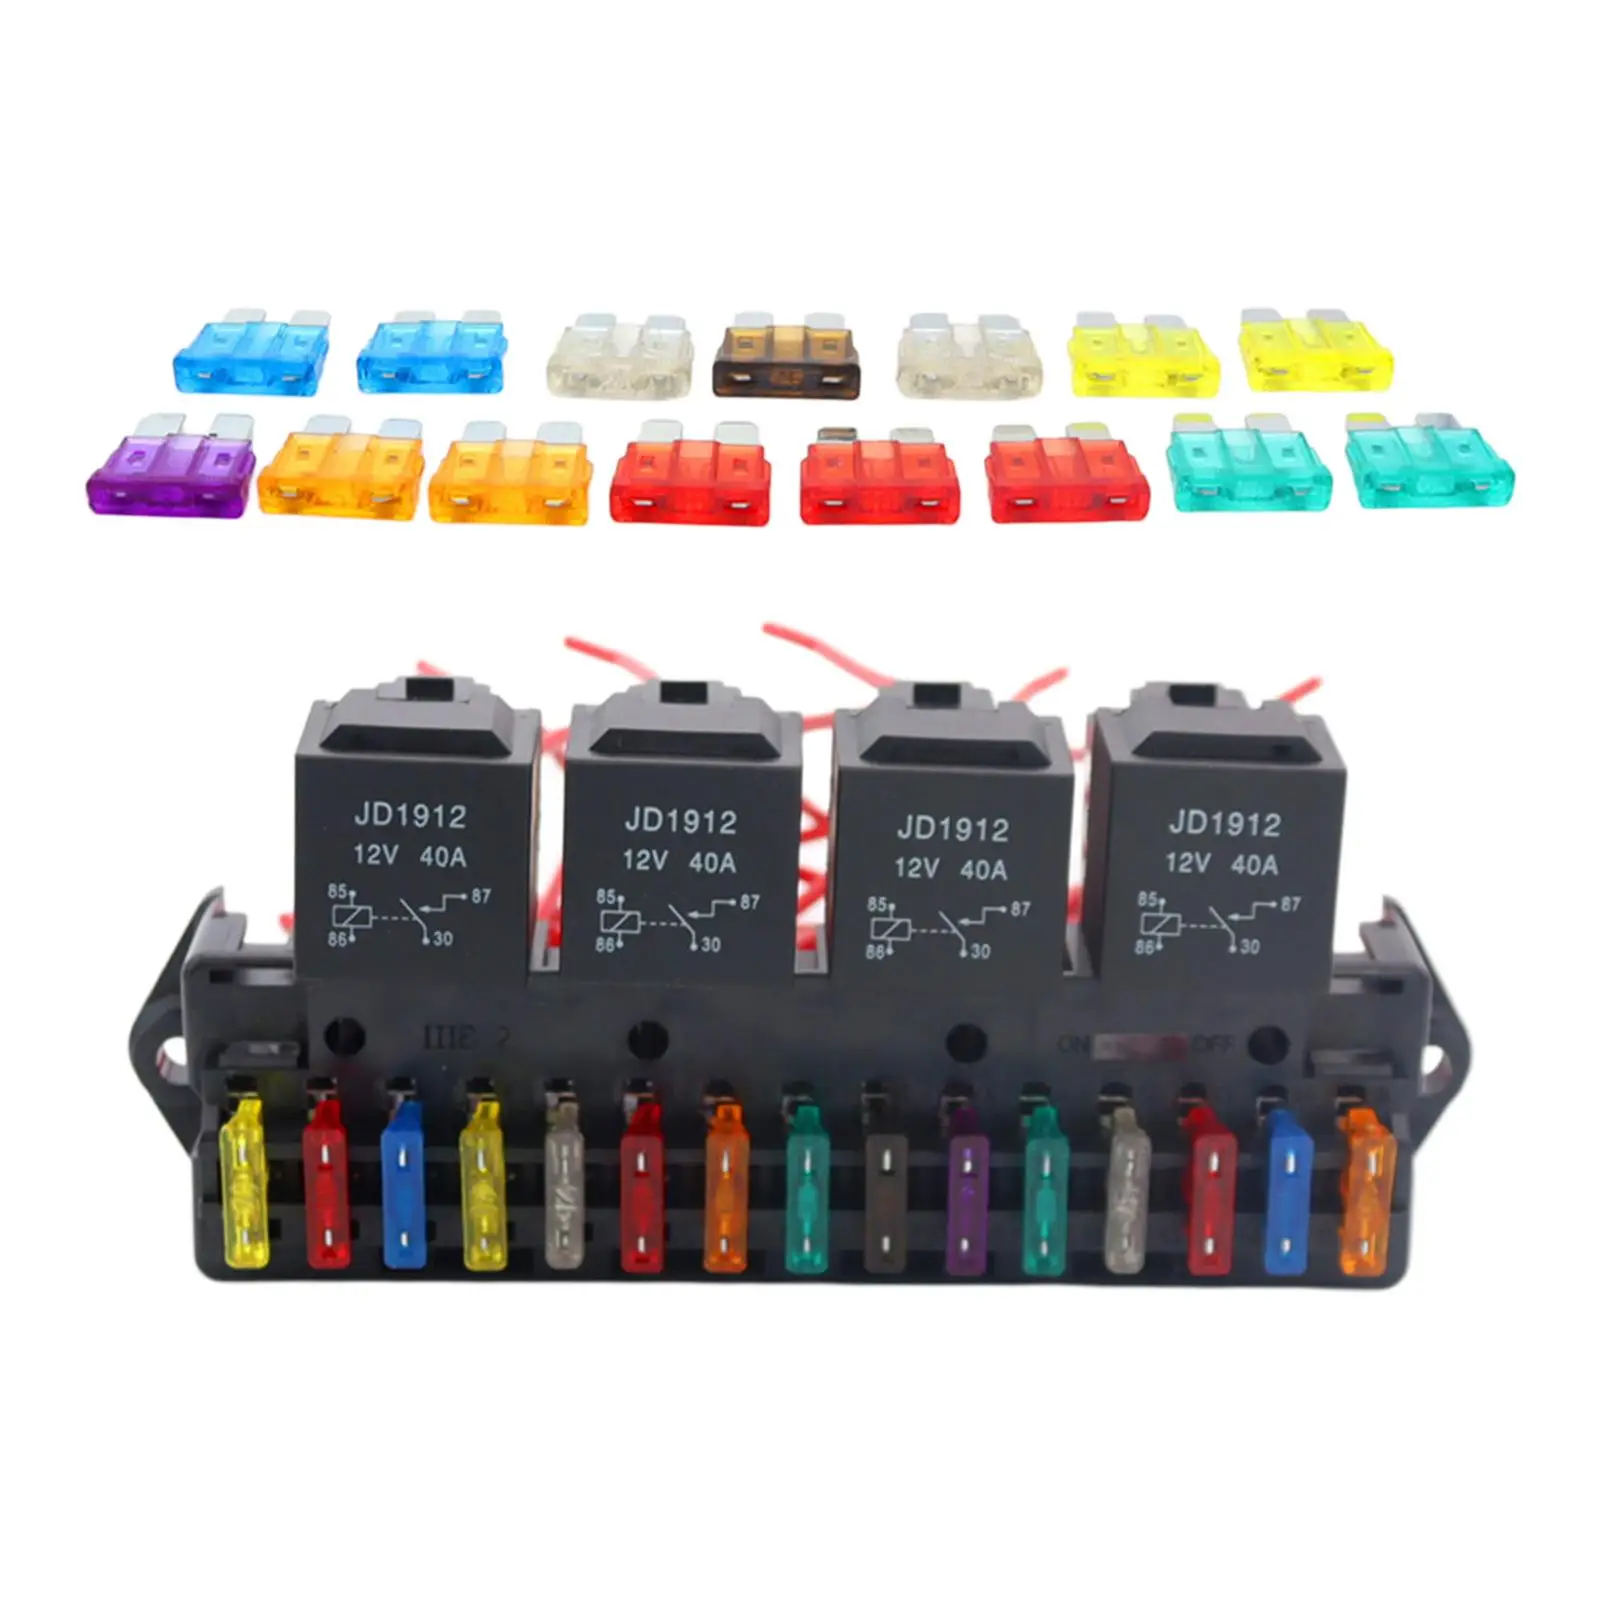 Marine Boat 15 Way Car Fuse Box Block Holder W/ Relay Fit for Automotive